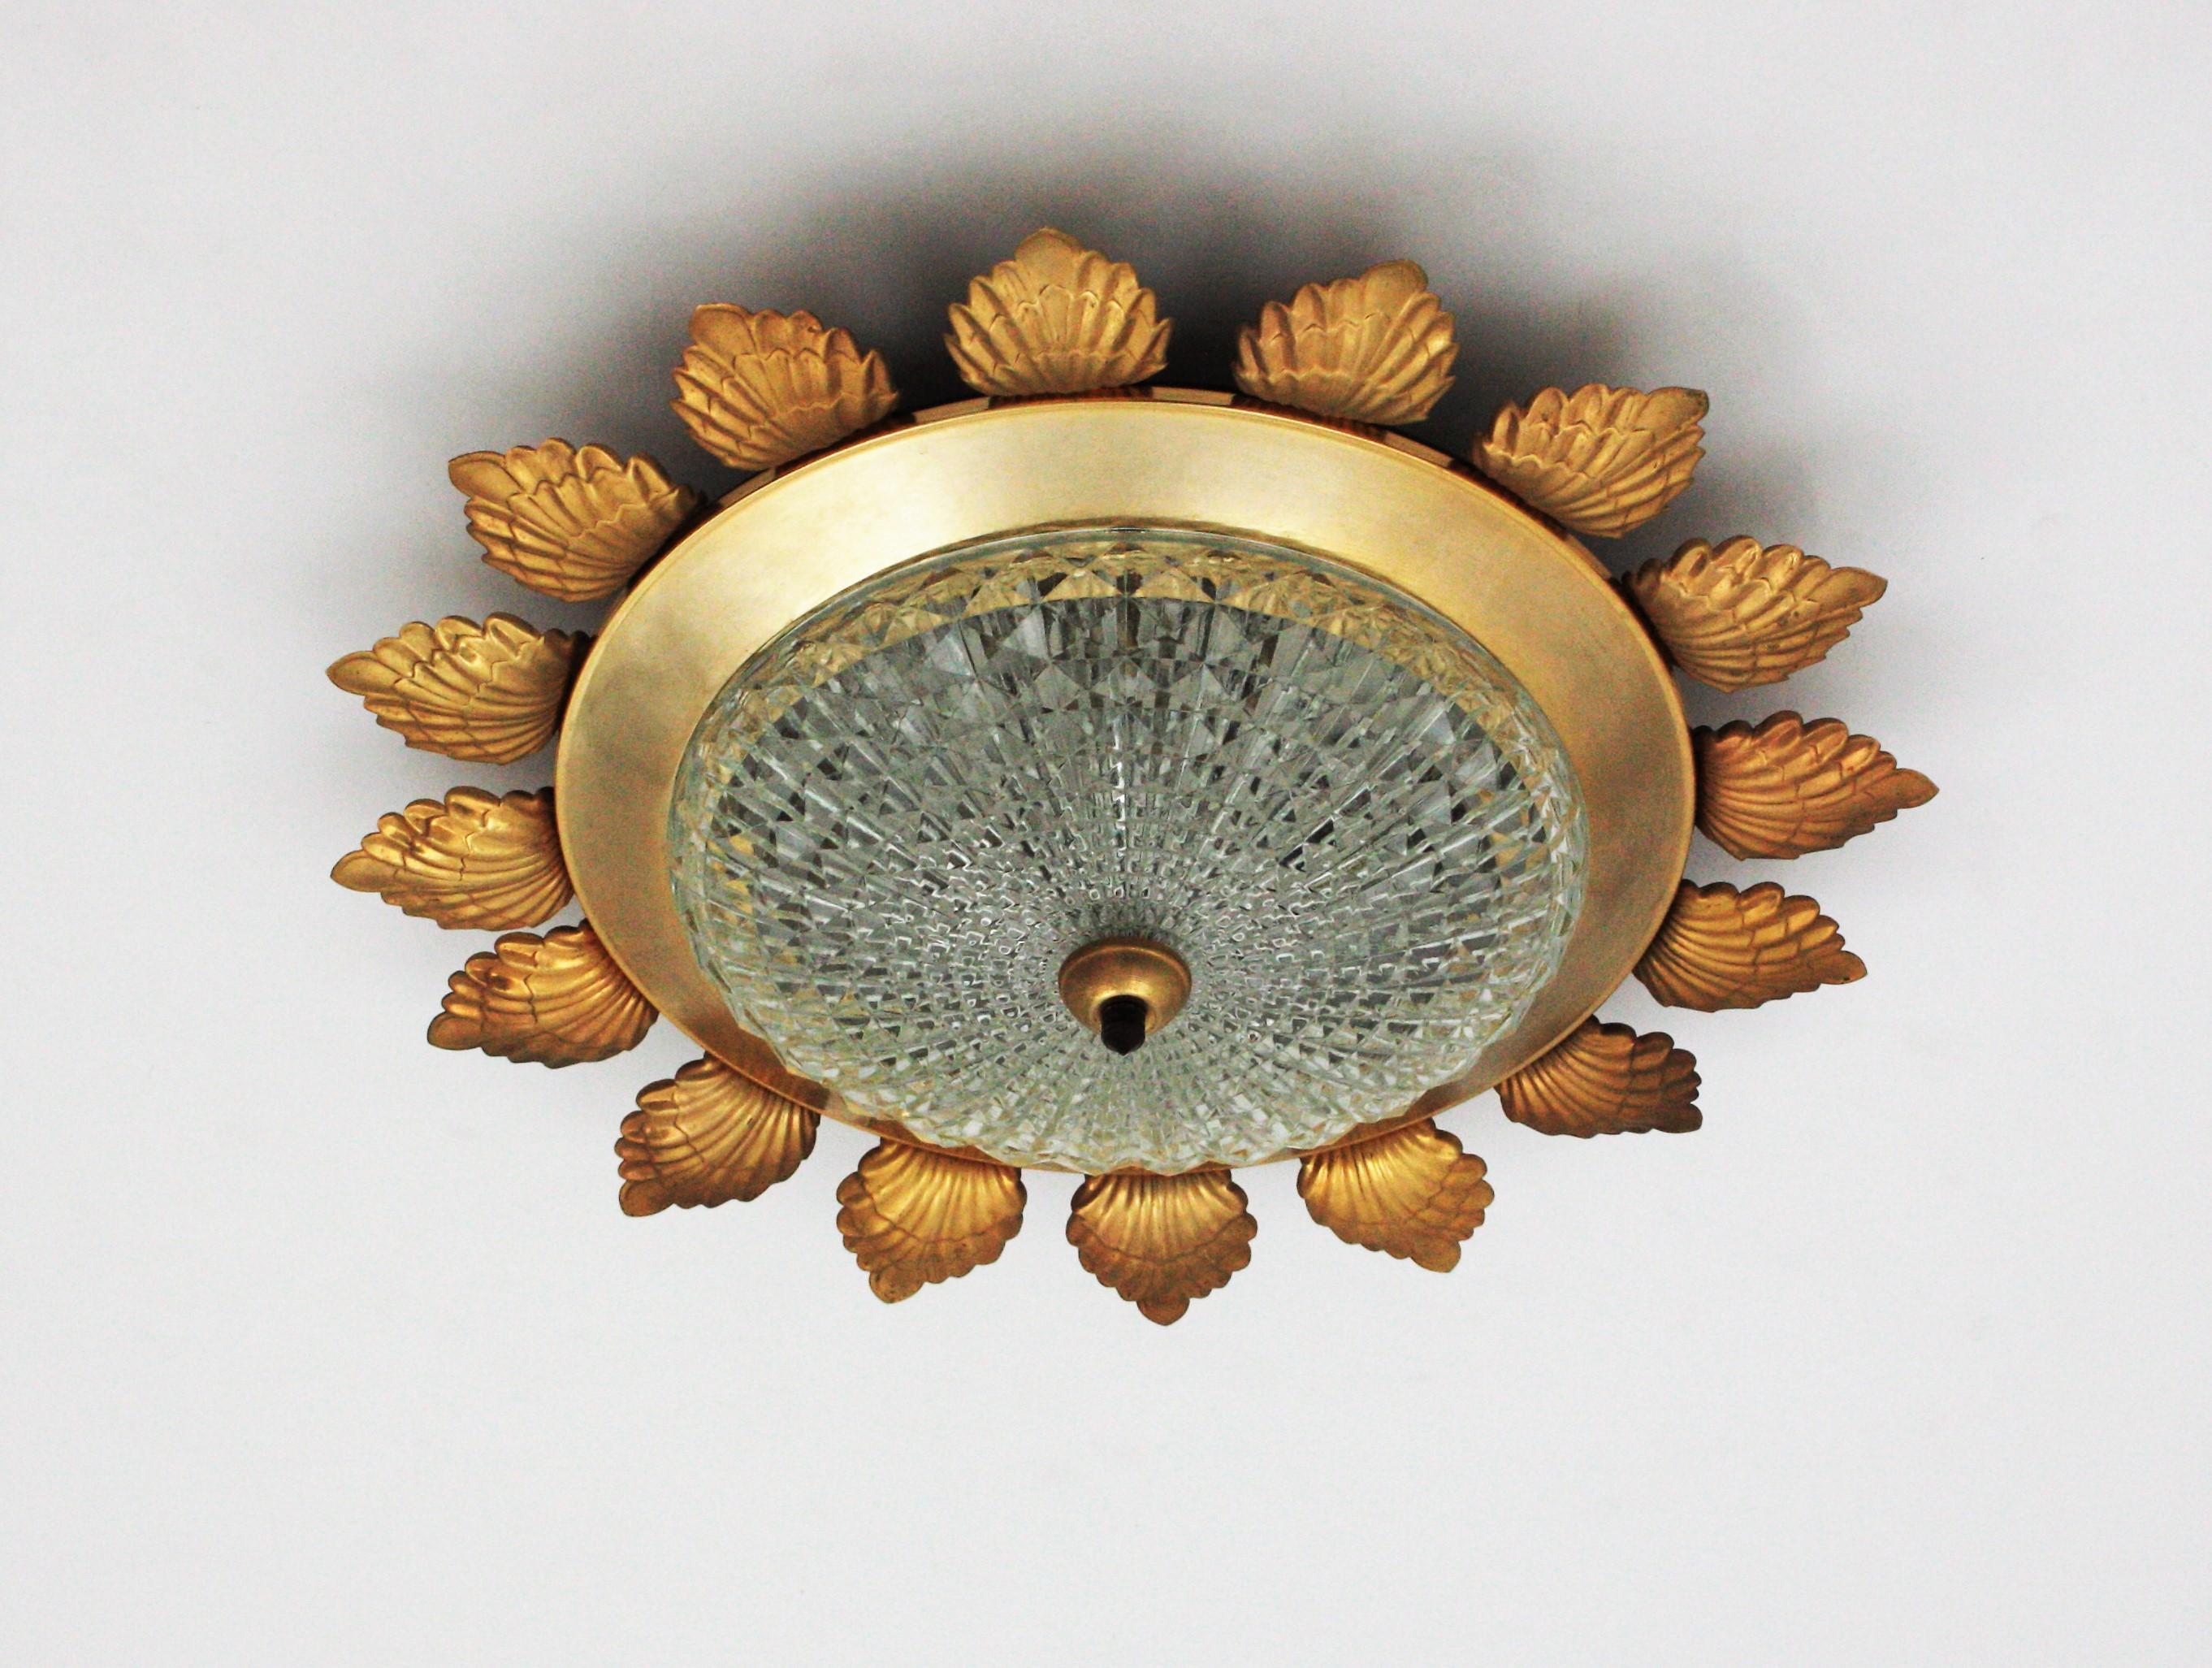 Flower shaped flush mount, Gilt Metal, Pressed Glass, Spain, 1960s.
This large ceiling lamp features a gilt metal flower shaped frame surrounding a central pressed glass shade. 
It has a beautiful design combining neoclassical style and Midcentury